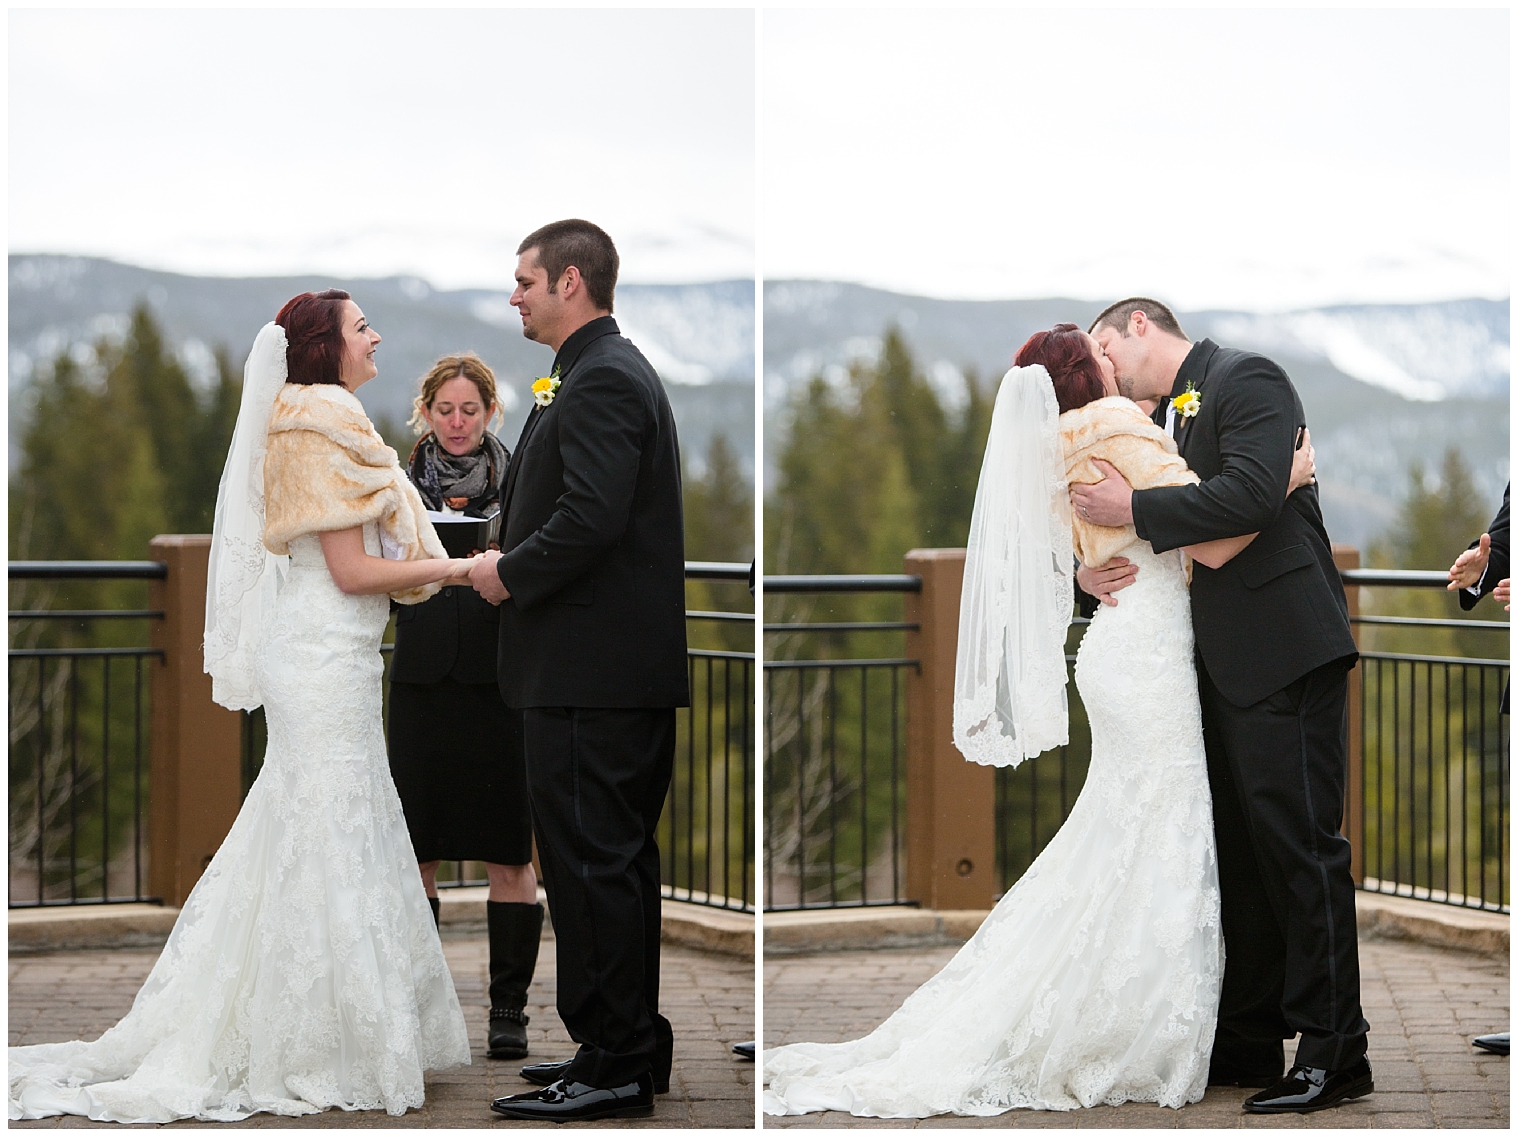 The wedding couple share their first kiss at their Colorado mountain wedding ceremony.